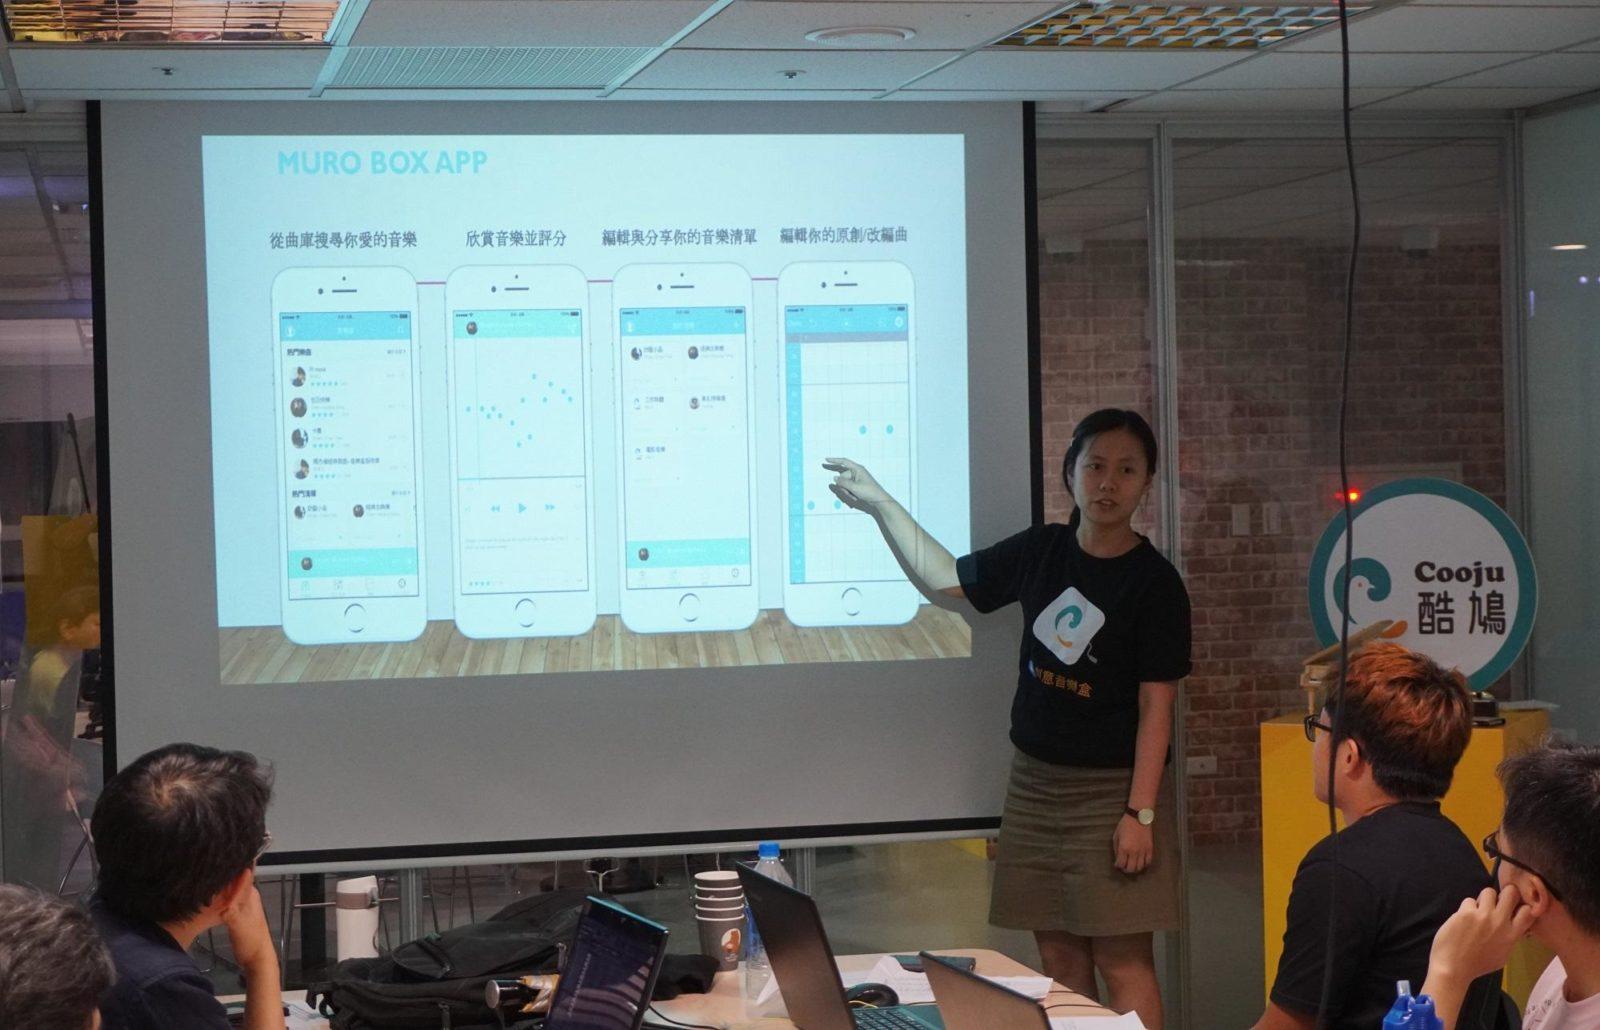 Dr.Tsai introduced Muro Box (programmable music box) app in the music composing class in 2018.